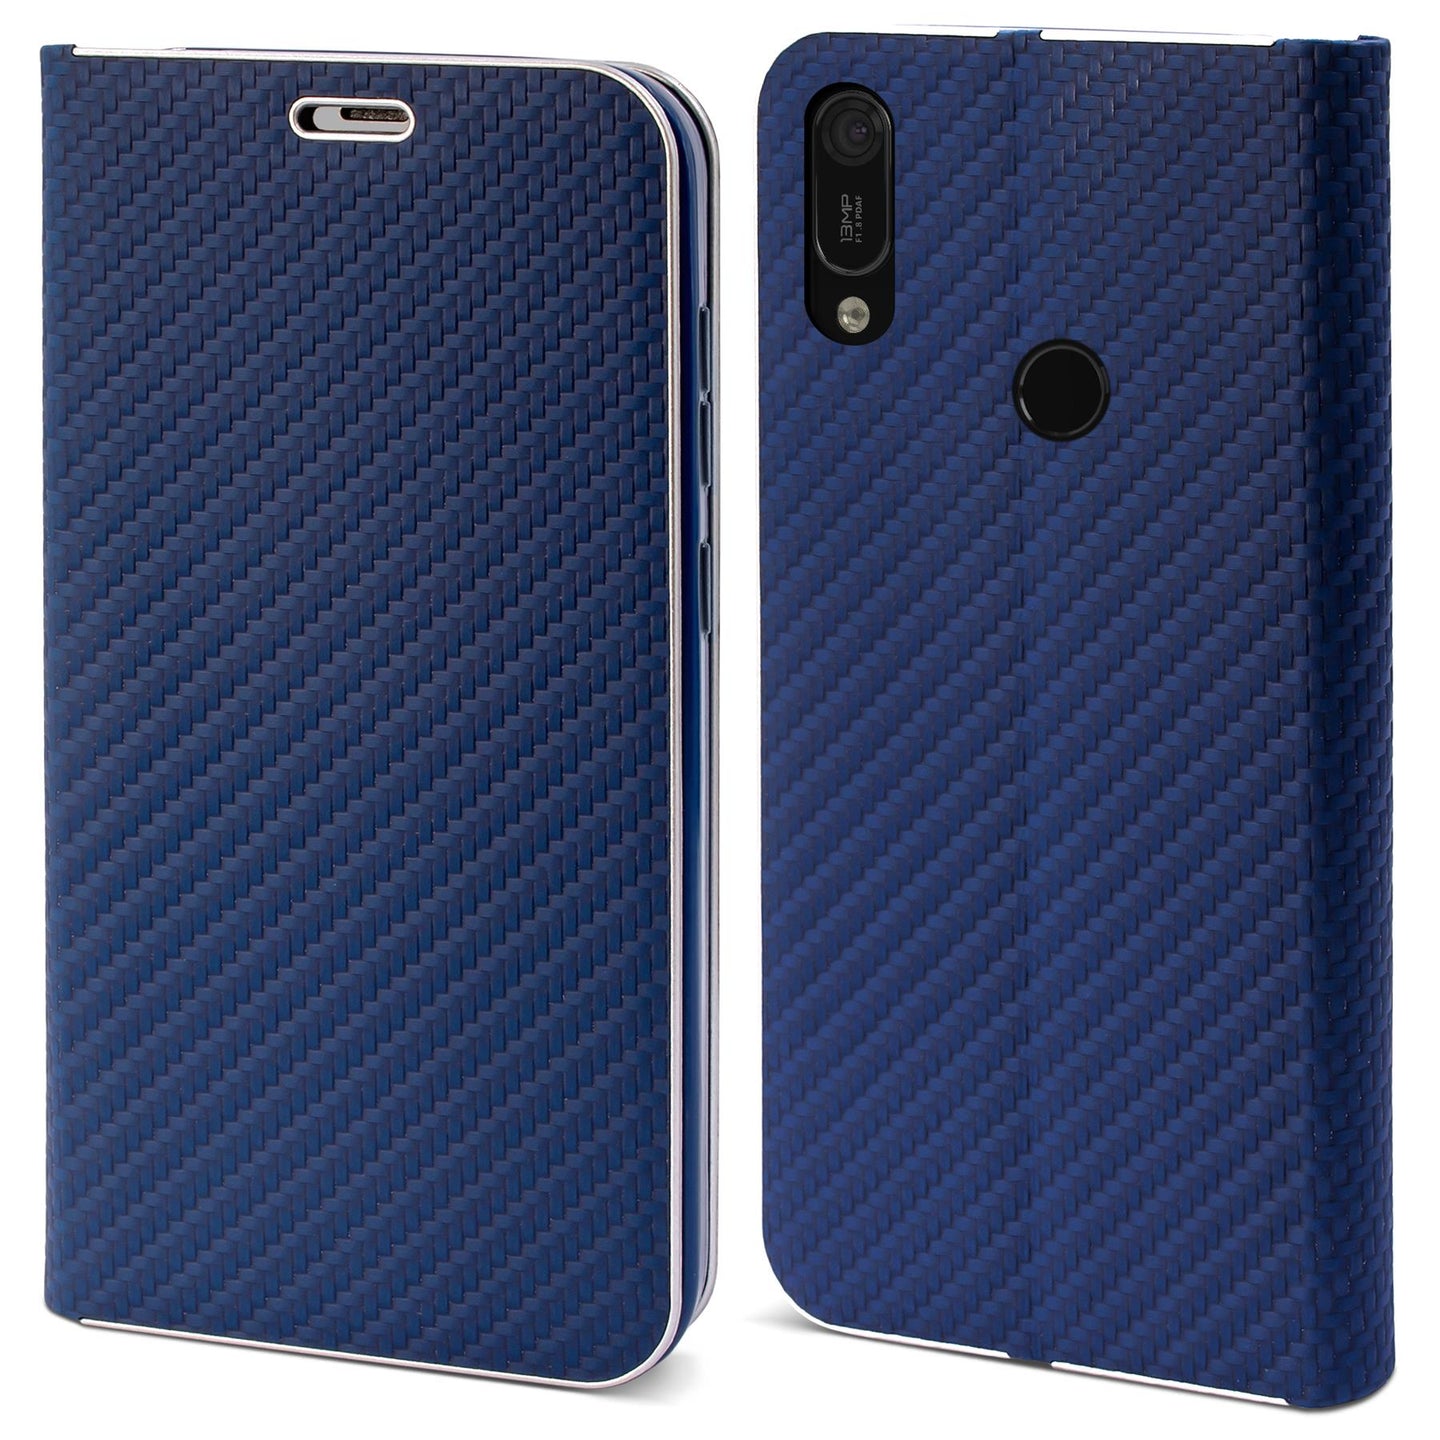 Moozy Wallet Case for Huawei Y6 2019, Dark Blue Carbon – Metallic Edge Protection Magnetic Closure Flip Cover with Card Holder